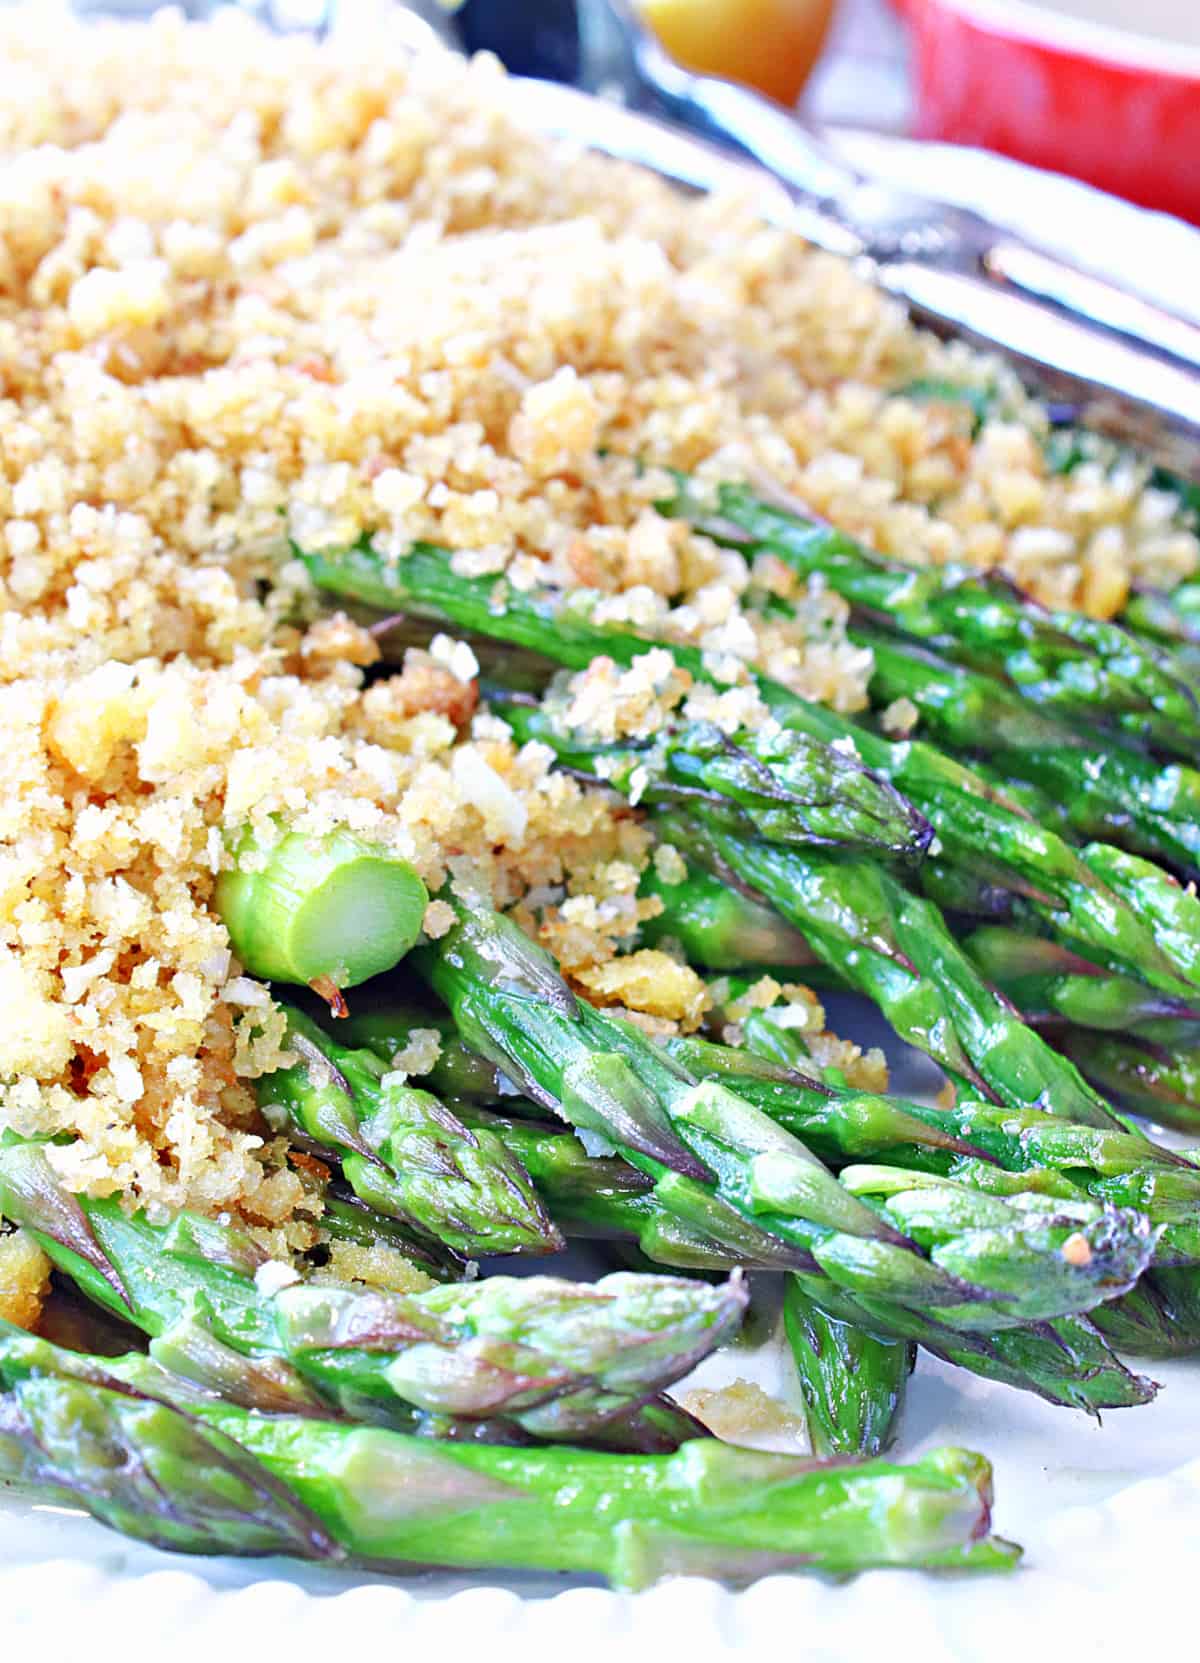 Asparagus with Breadcrumbs Recipe - Kudos Kitchen by Renee